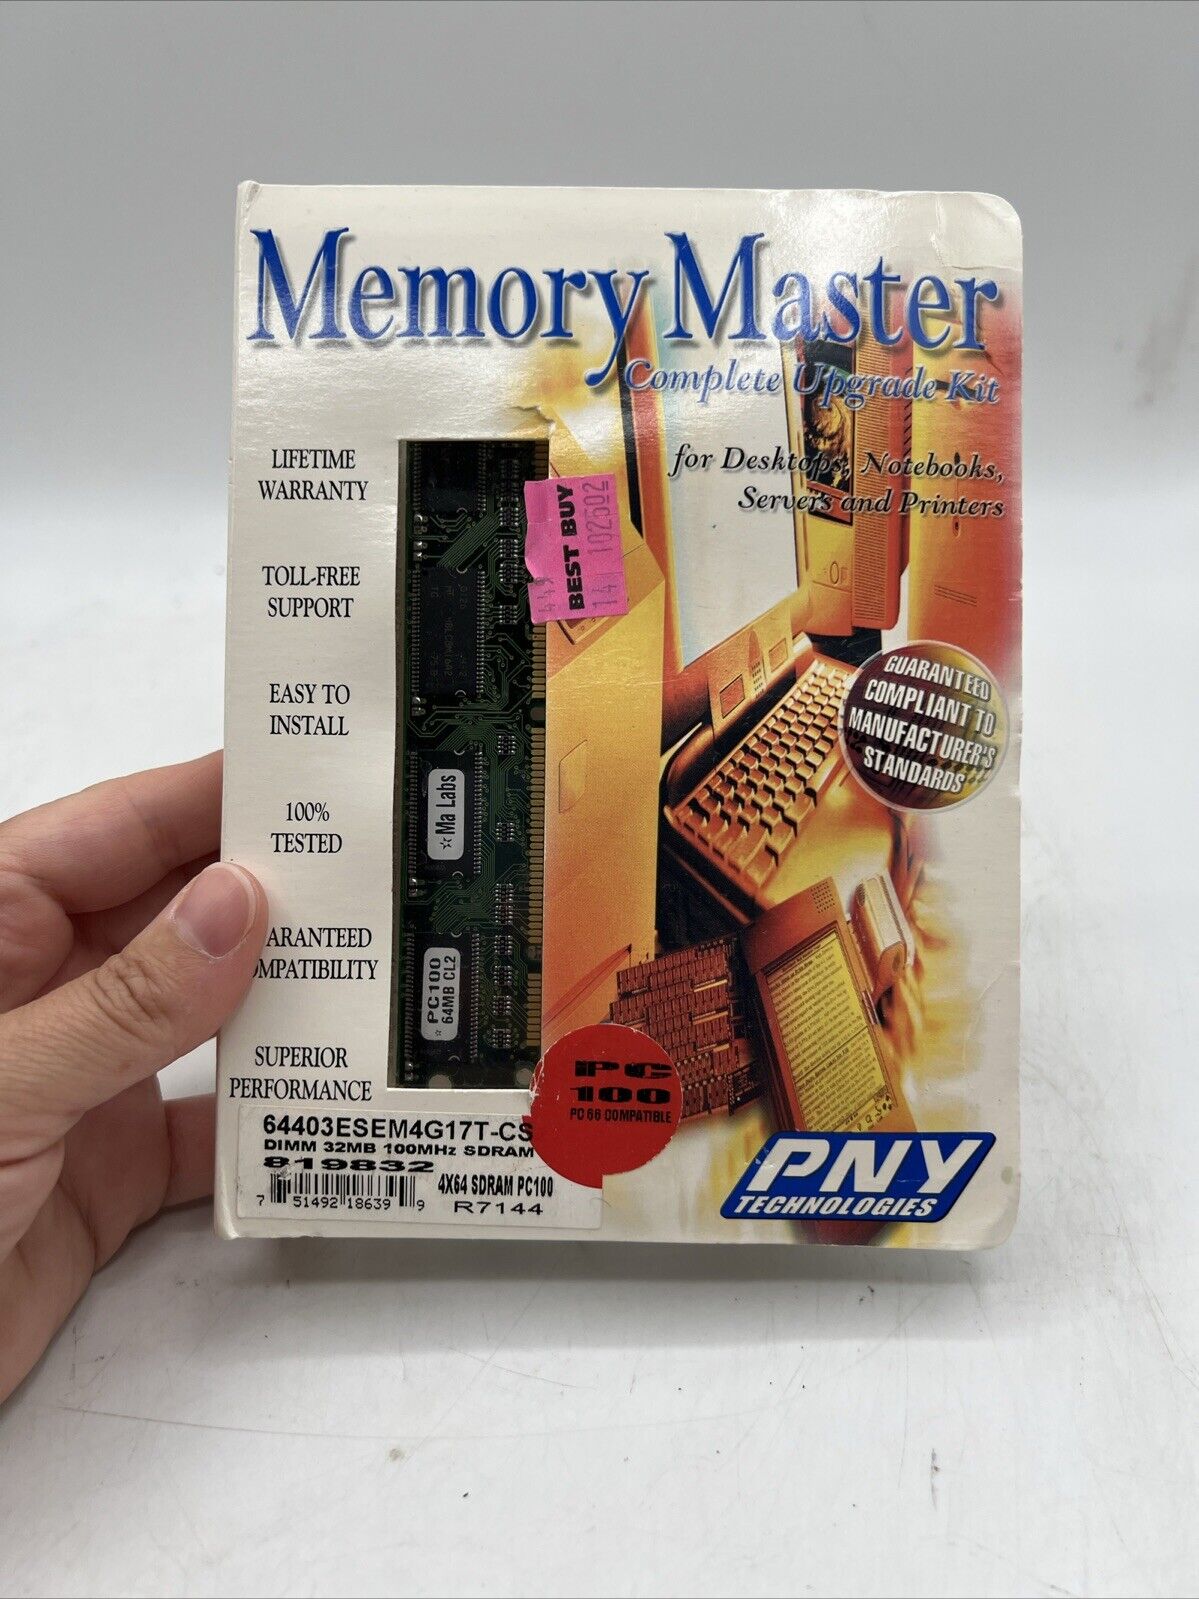 Memory Master Complete Upgrade Kit  PNY Technologies Dimm 32MB 100MHz SDRAM